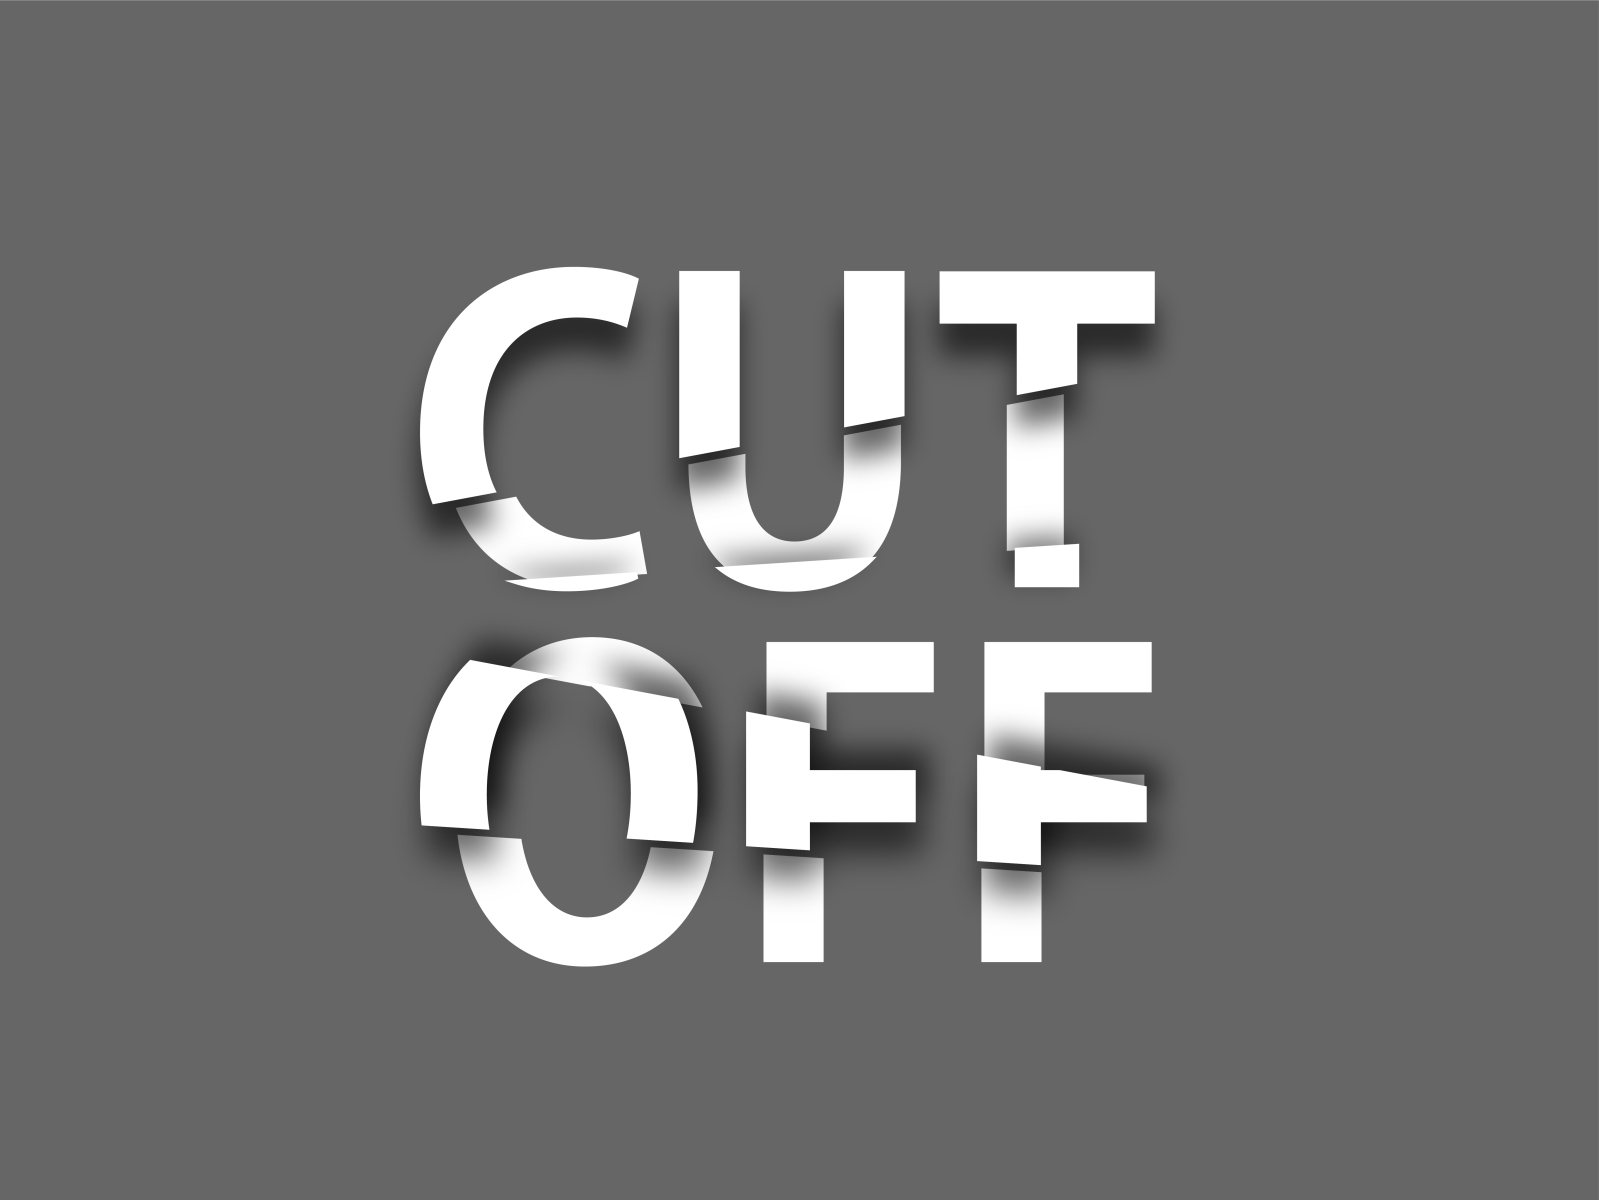 cut off by Manel-DesignItUp on Dribbble